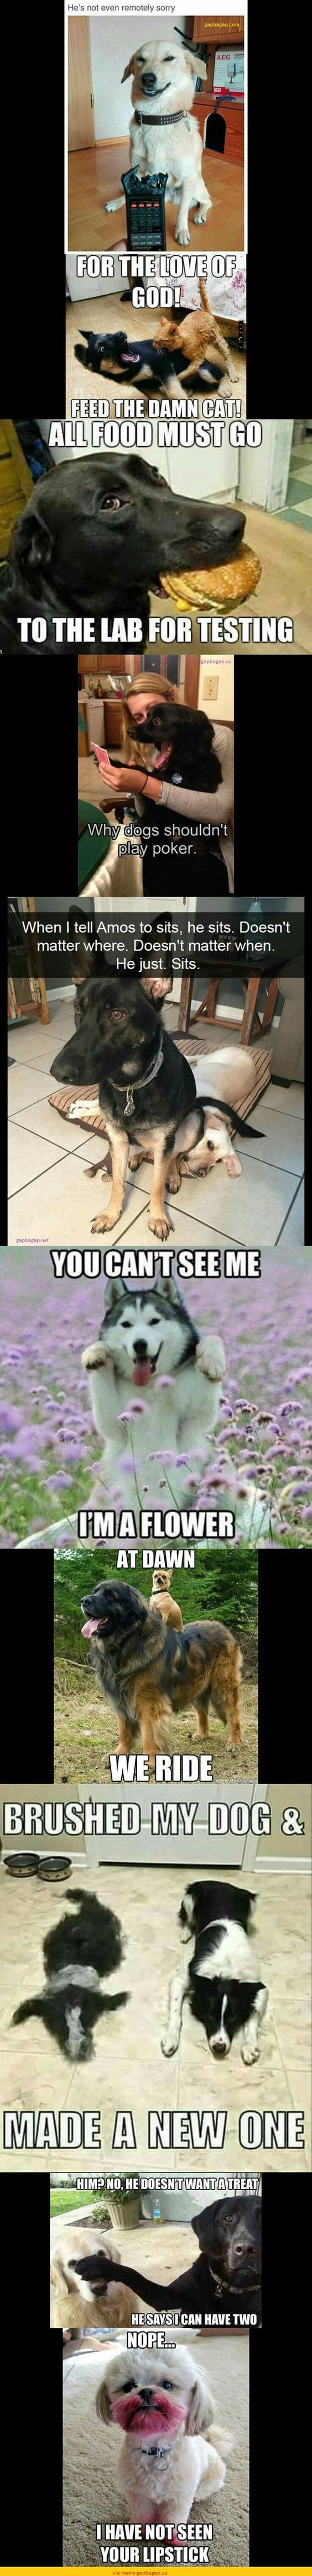 10 Funny Pics Of The Day Featuring Dogs